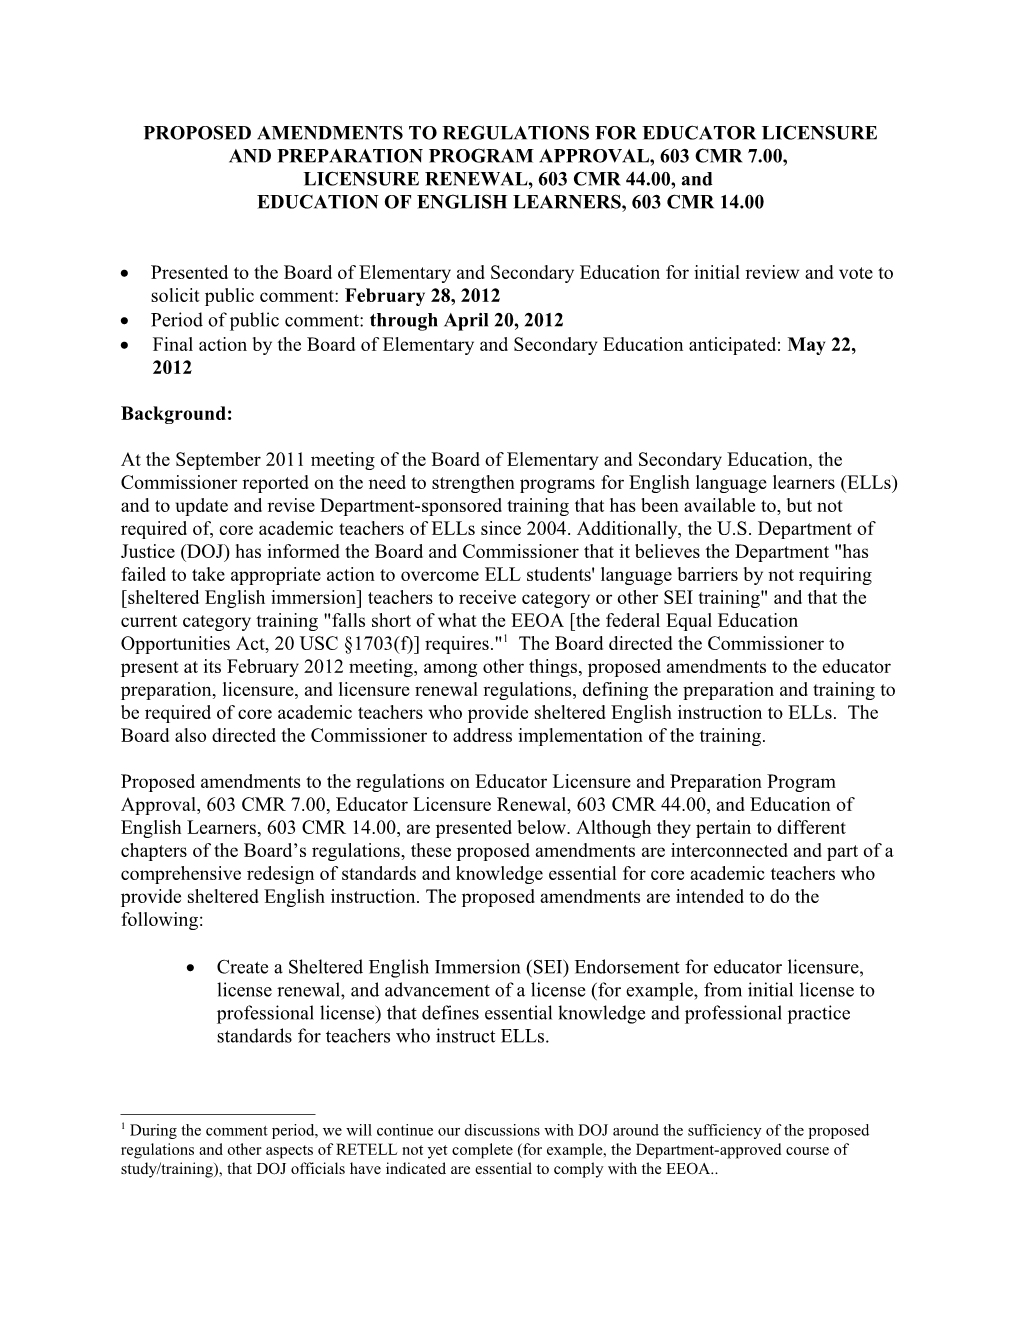 Proposed Amendments to Regulations for Educator Licensure and Preparation Program Approval